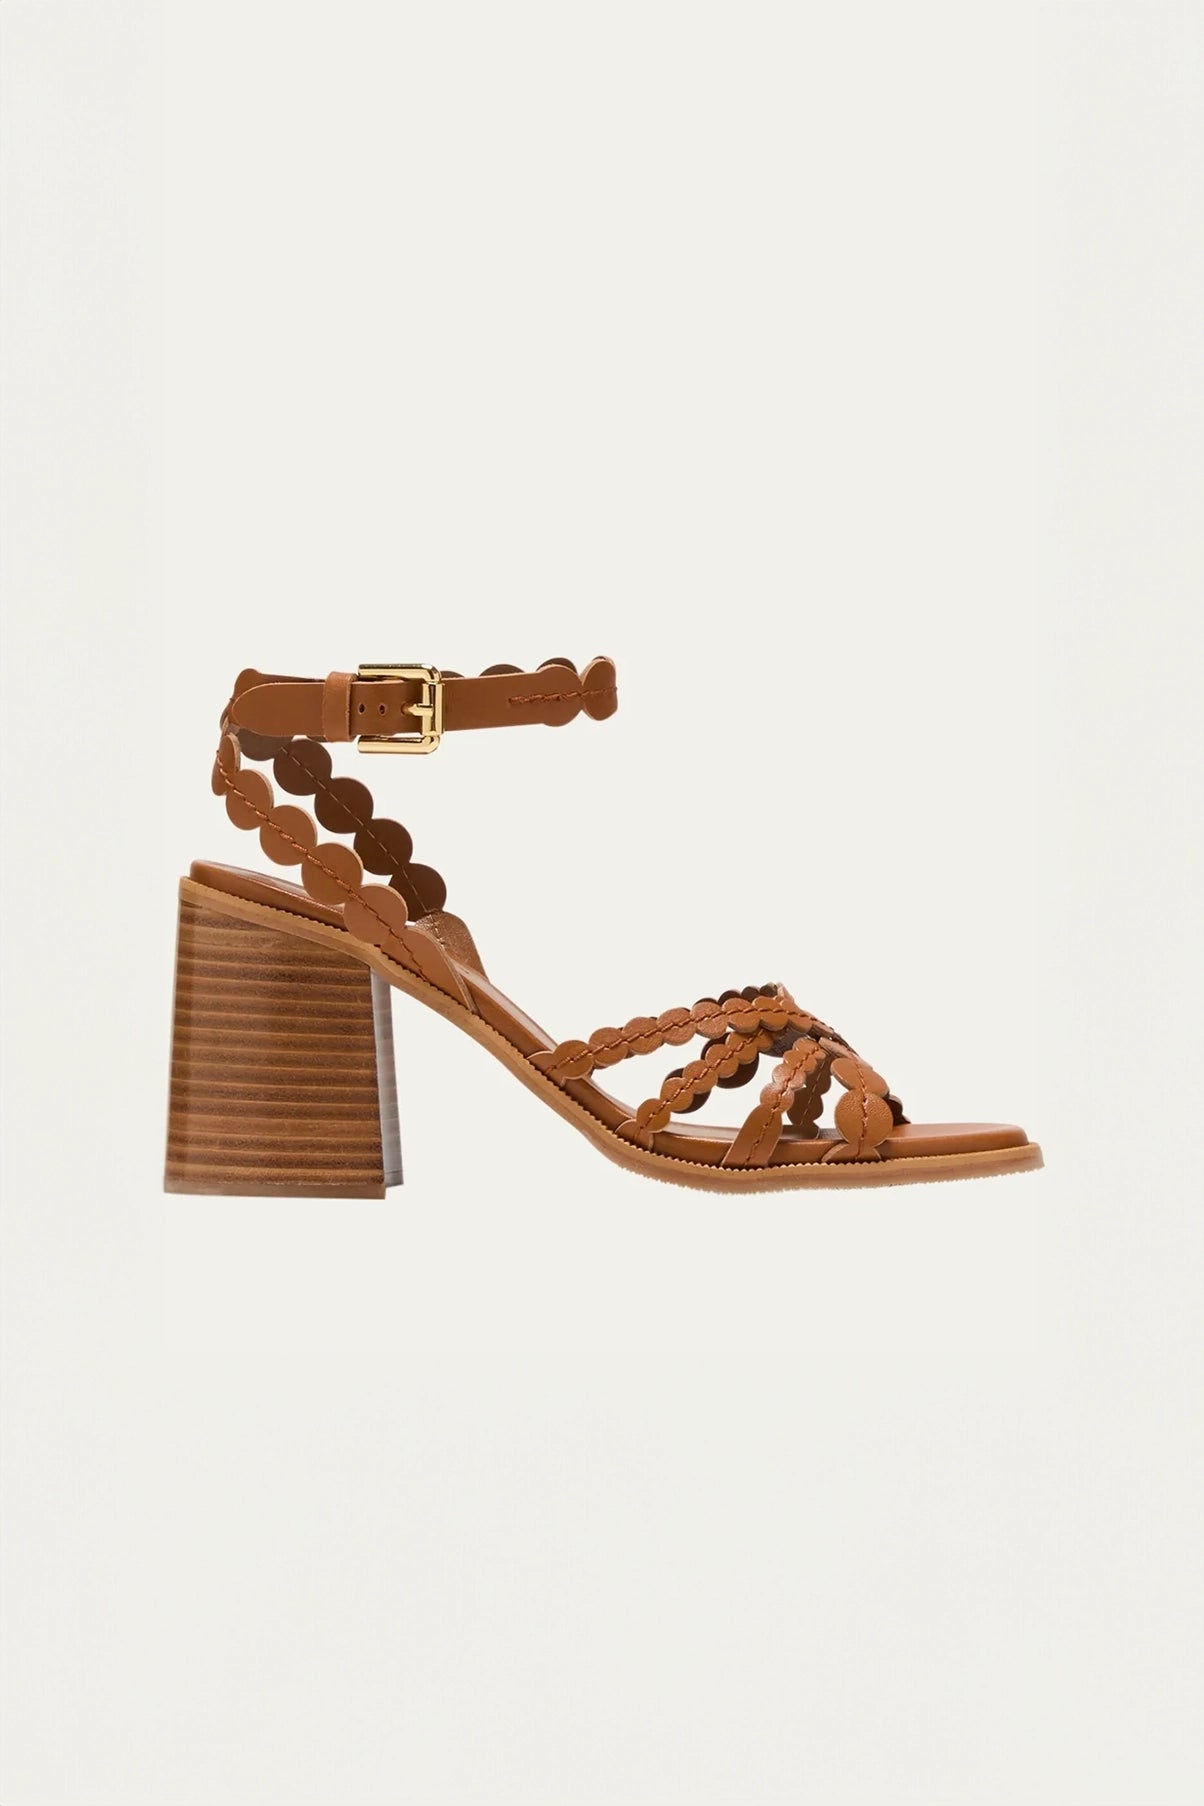 See By Chloe Kaddy Scallop Leather Ankle-Strap Sandals